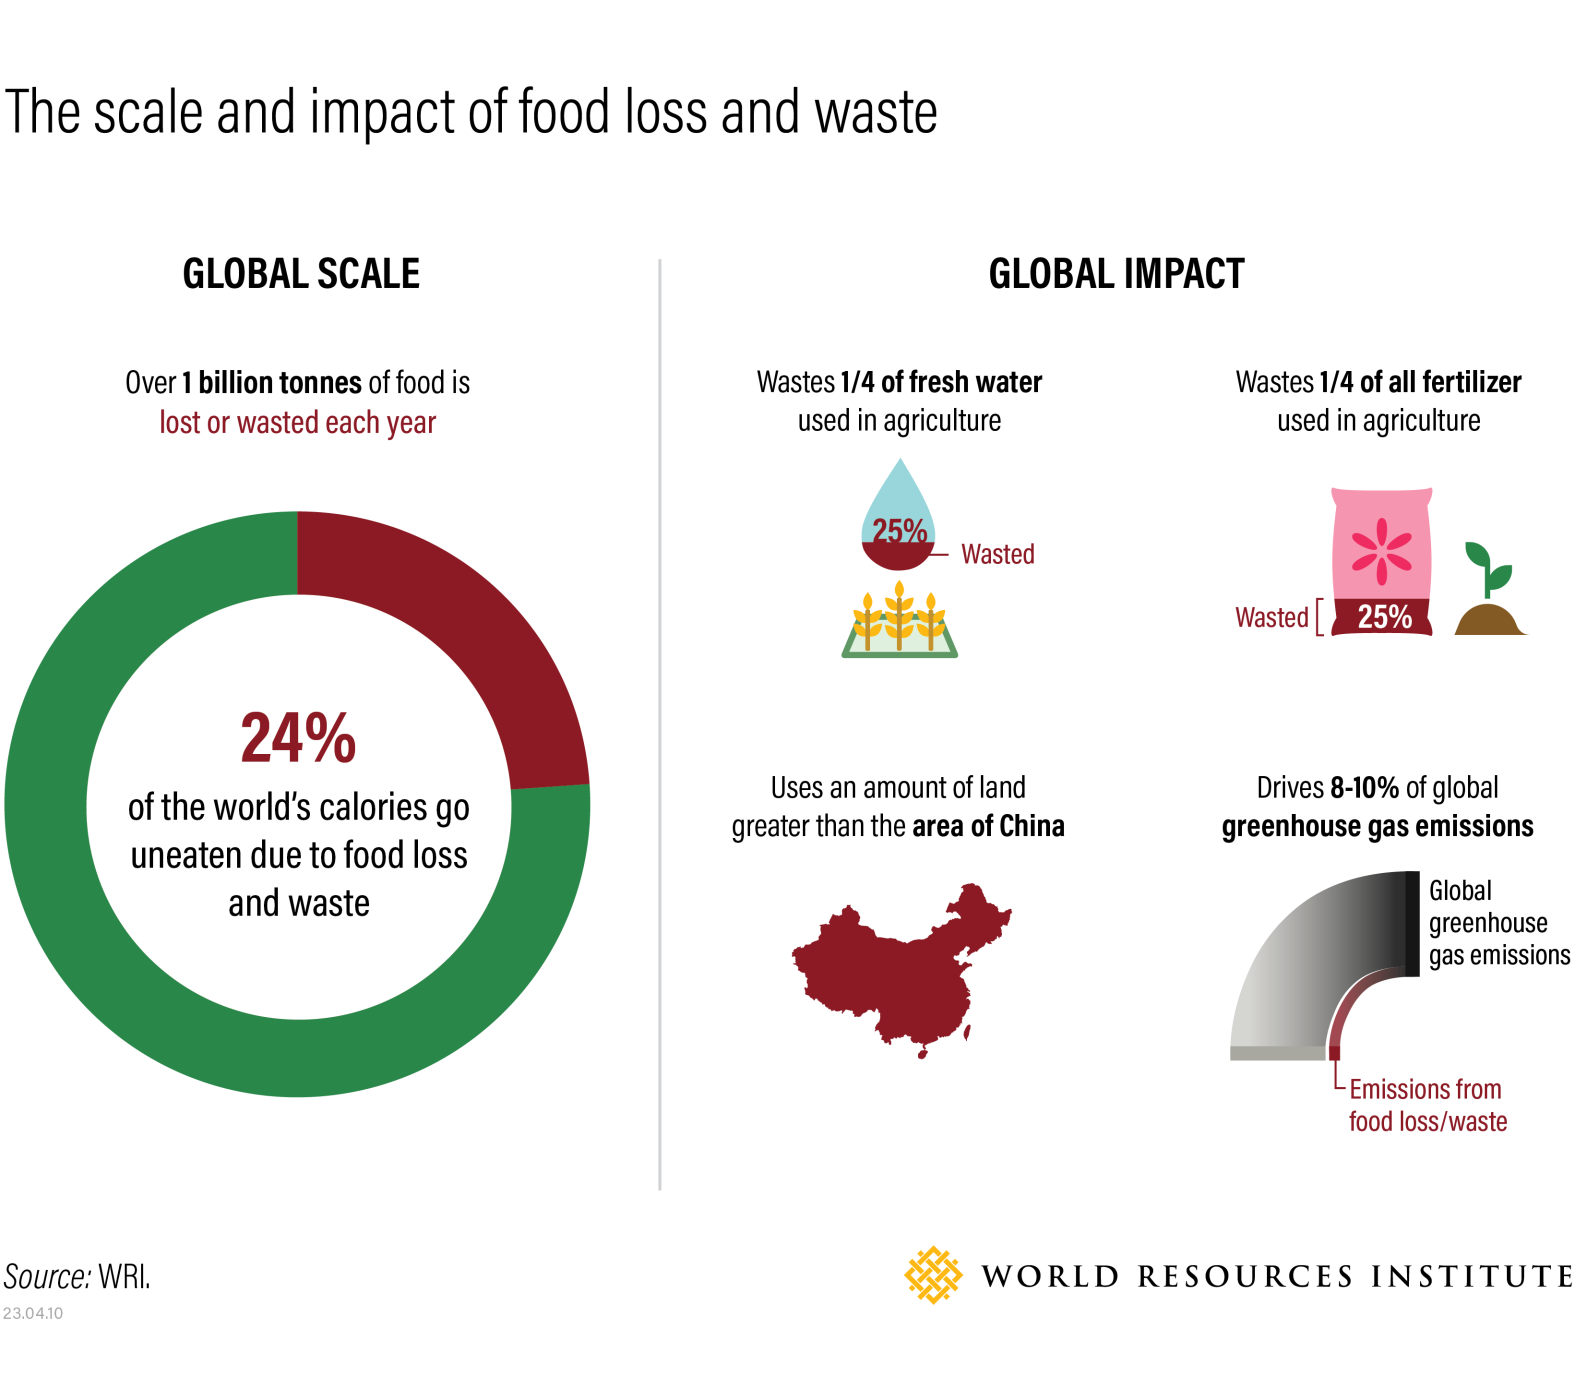 The scale and impact of food loss and waste